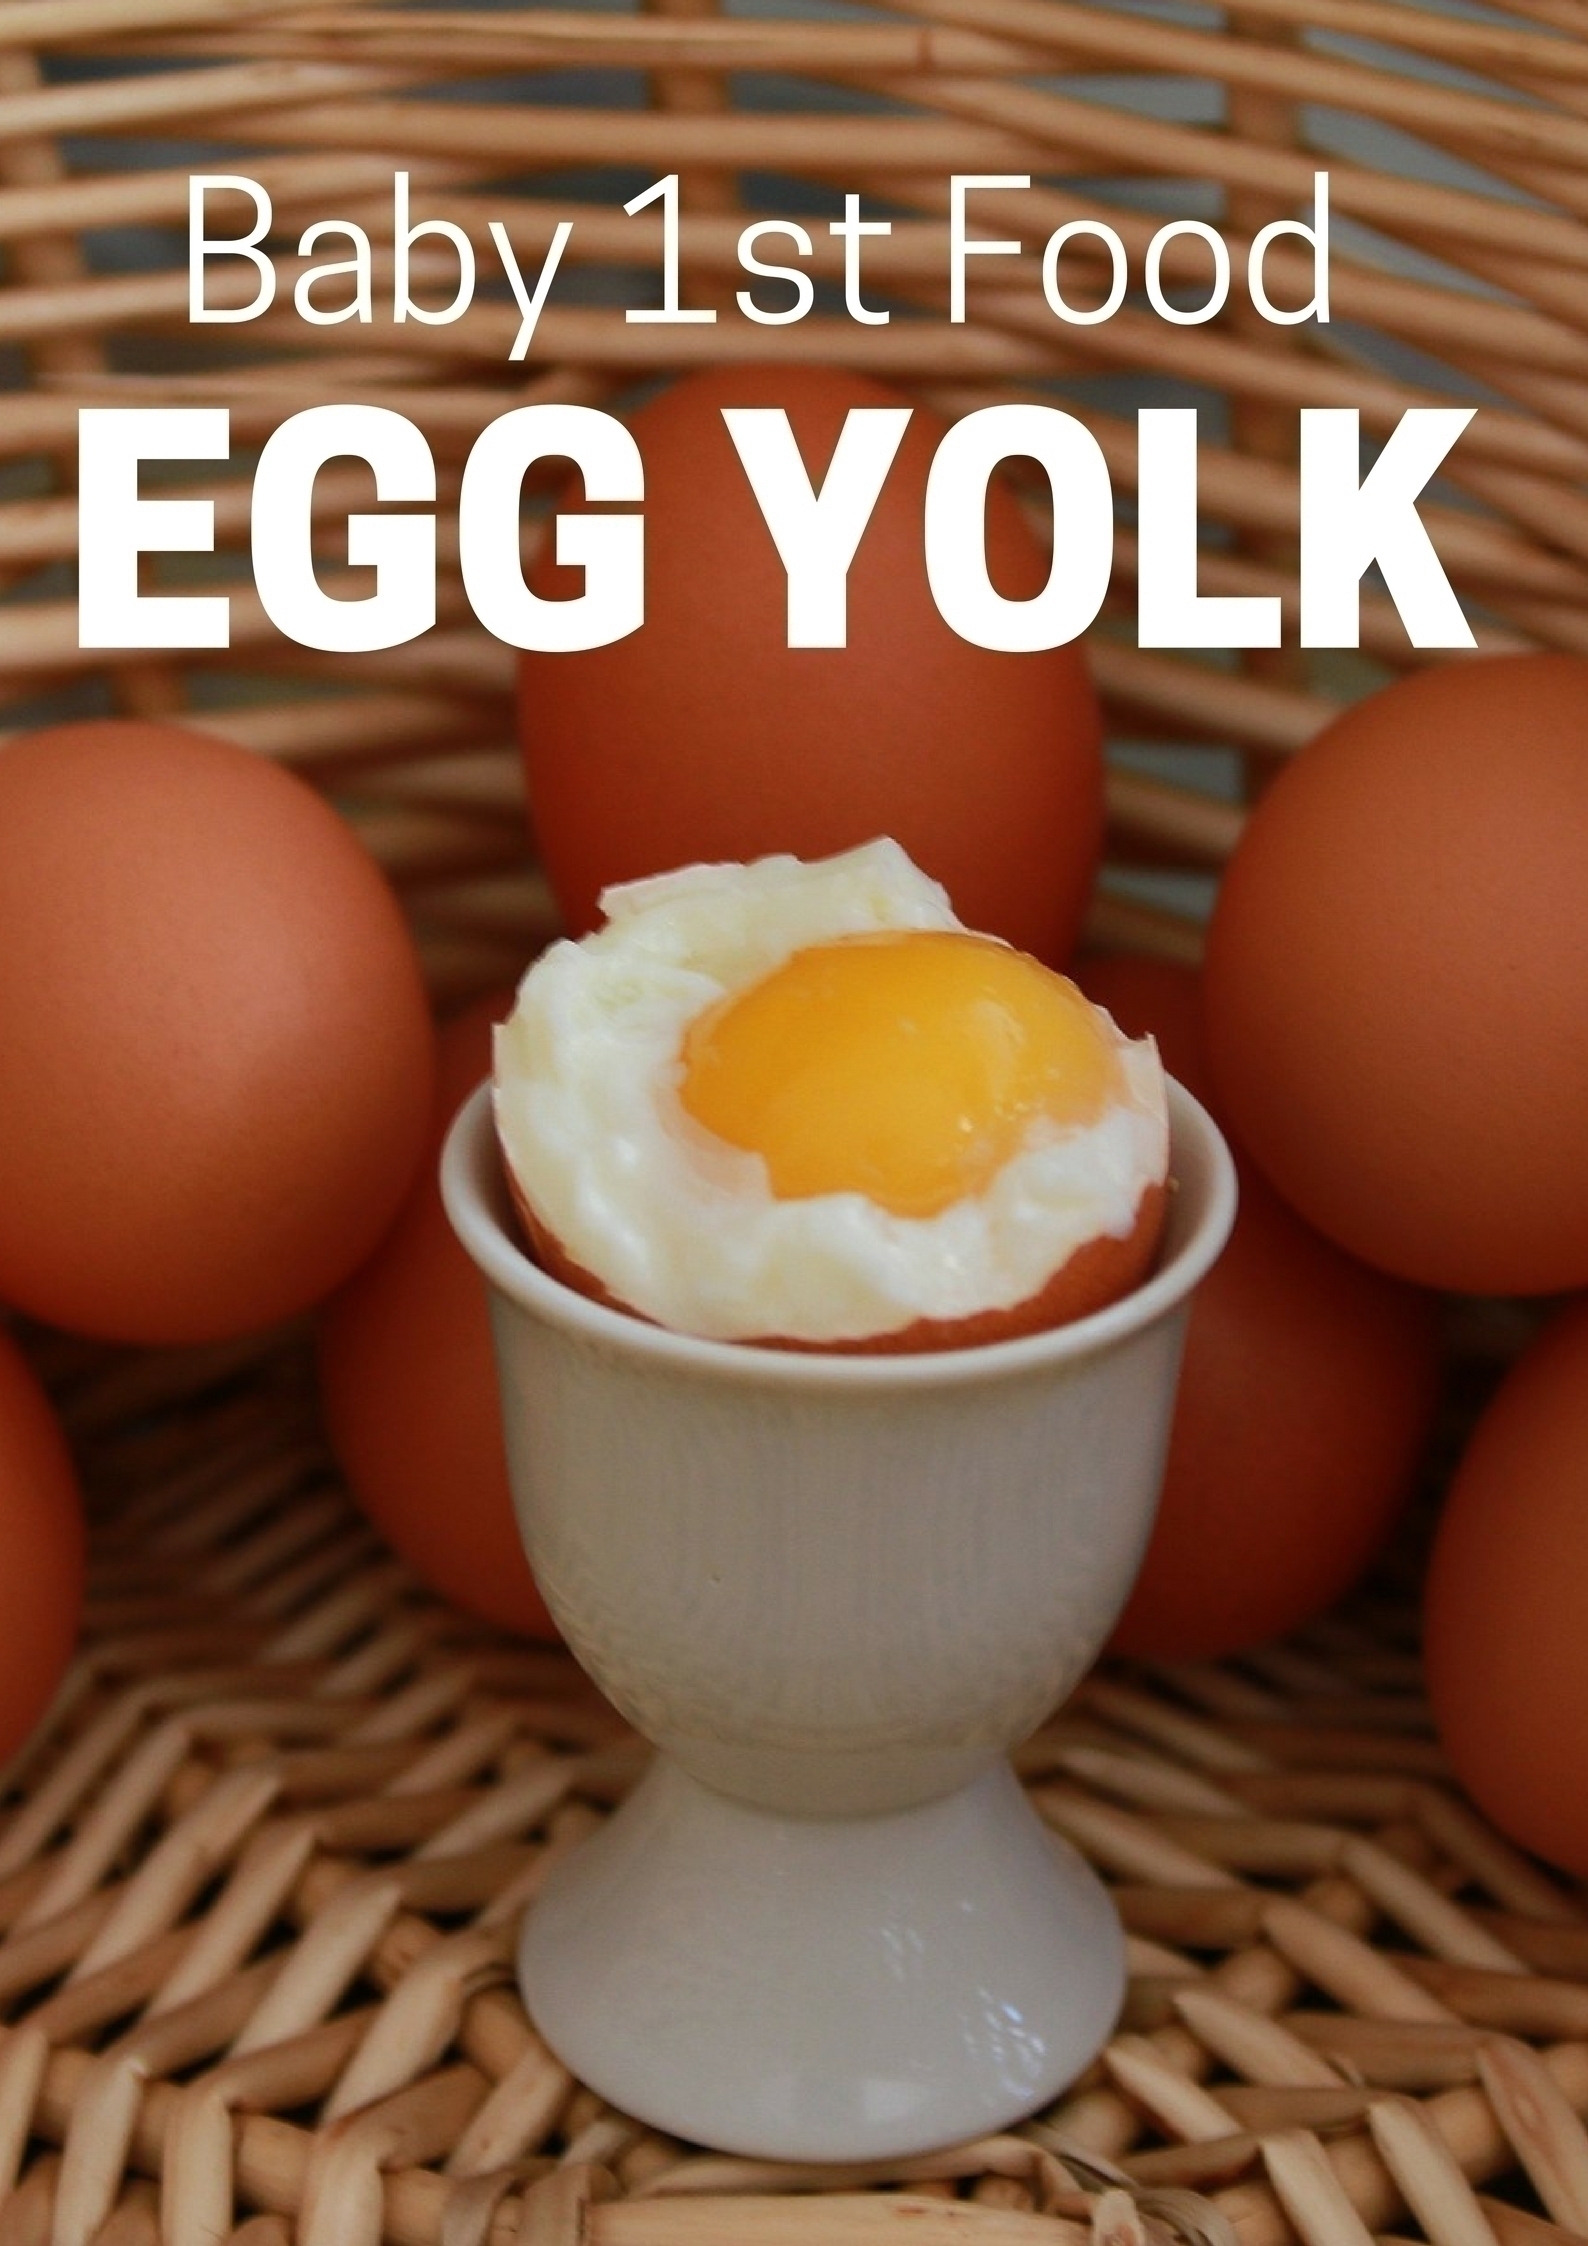 Egg yolks from free range pastured chickens contain fatty acids that will help support brain and nervous system development. They are, ultimately, the best first food for baby. Find out why.